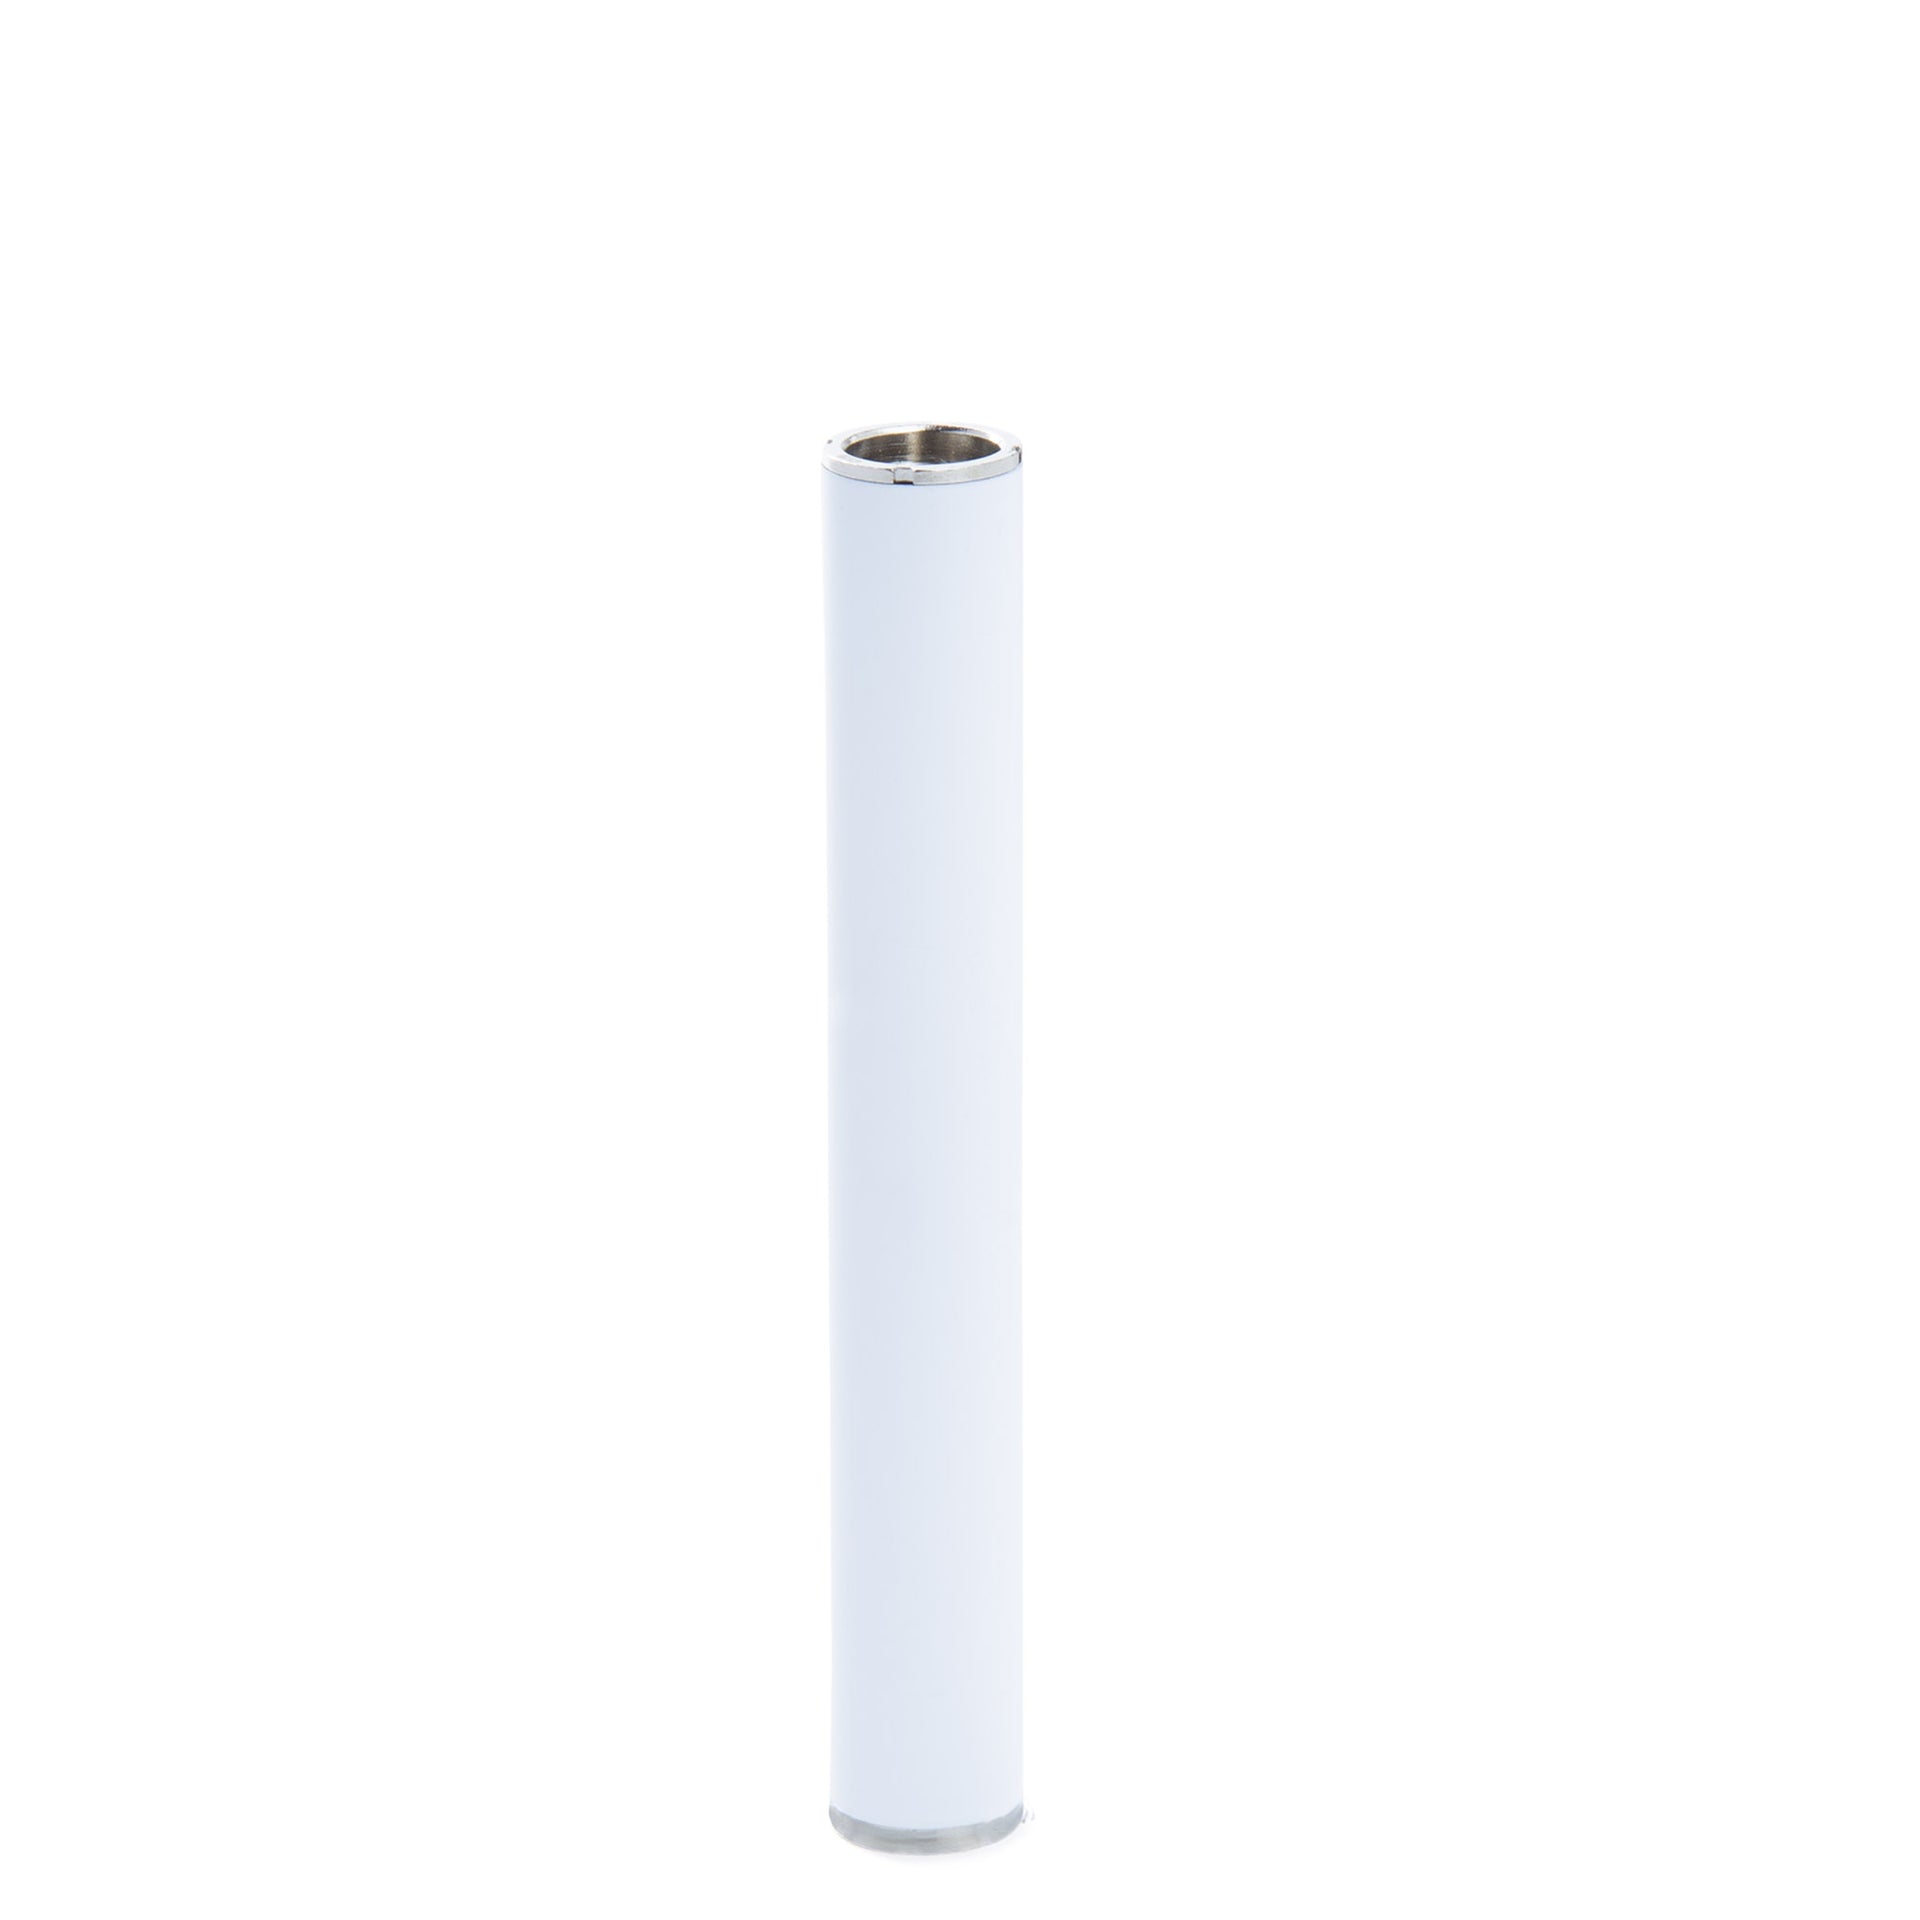 CCell M3 Battery - Authentic CCell Vape Pen Battery